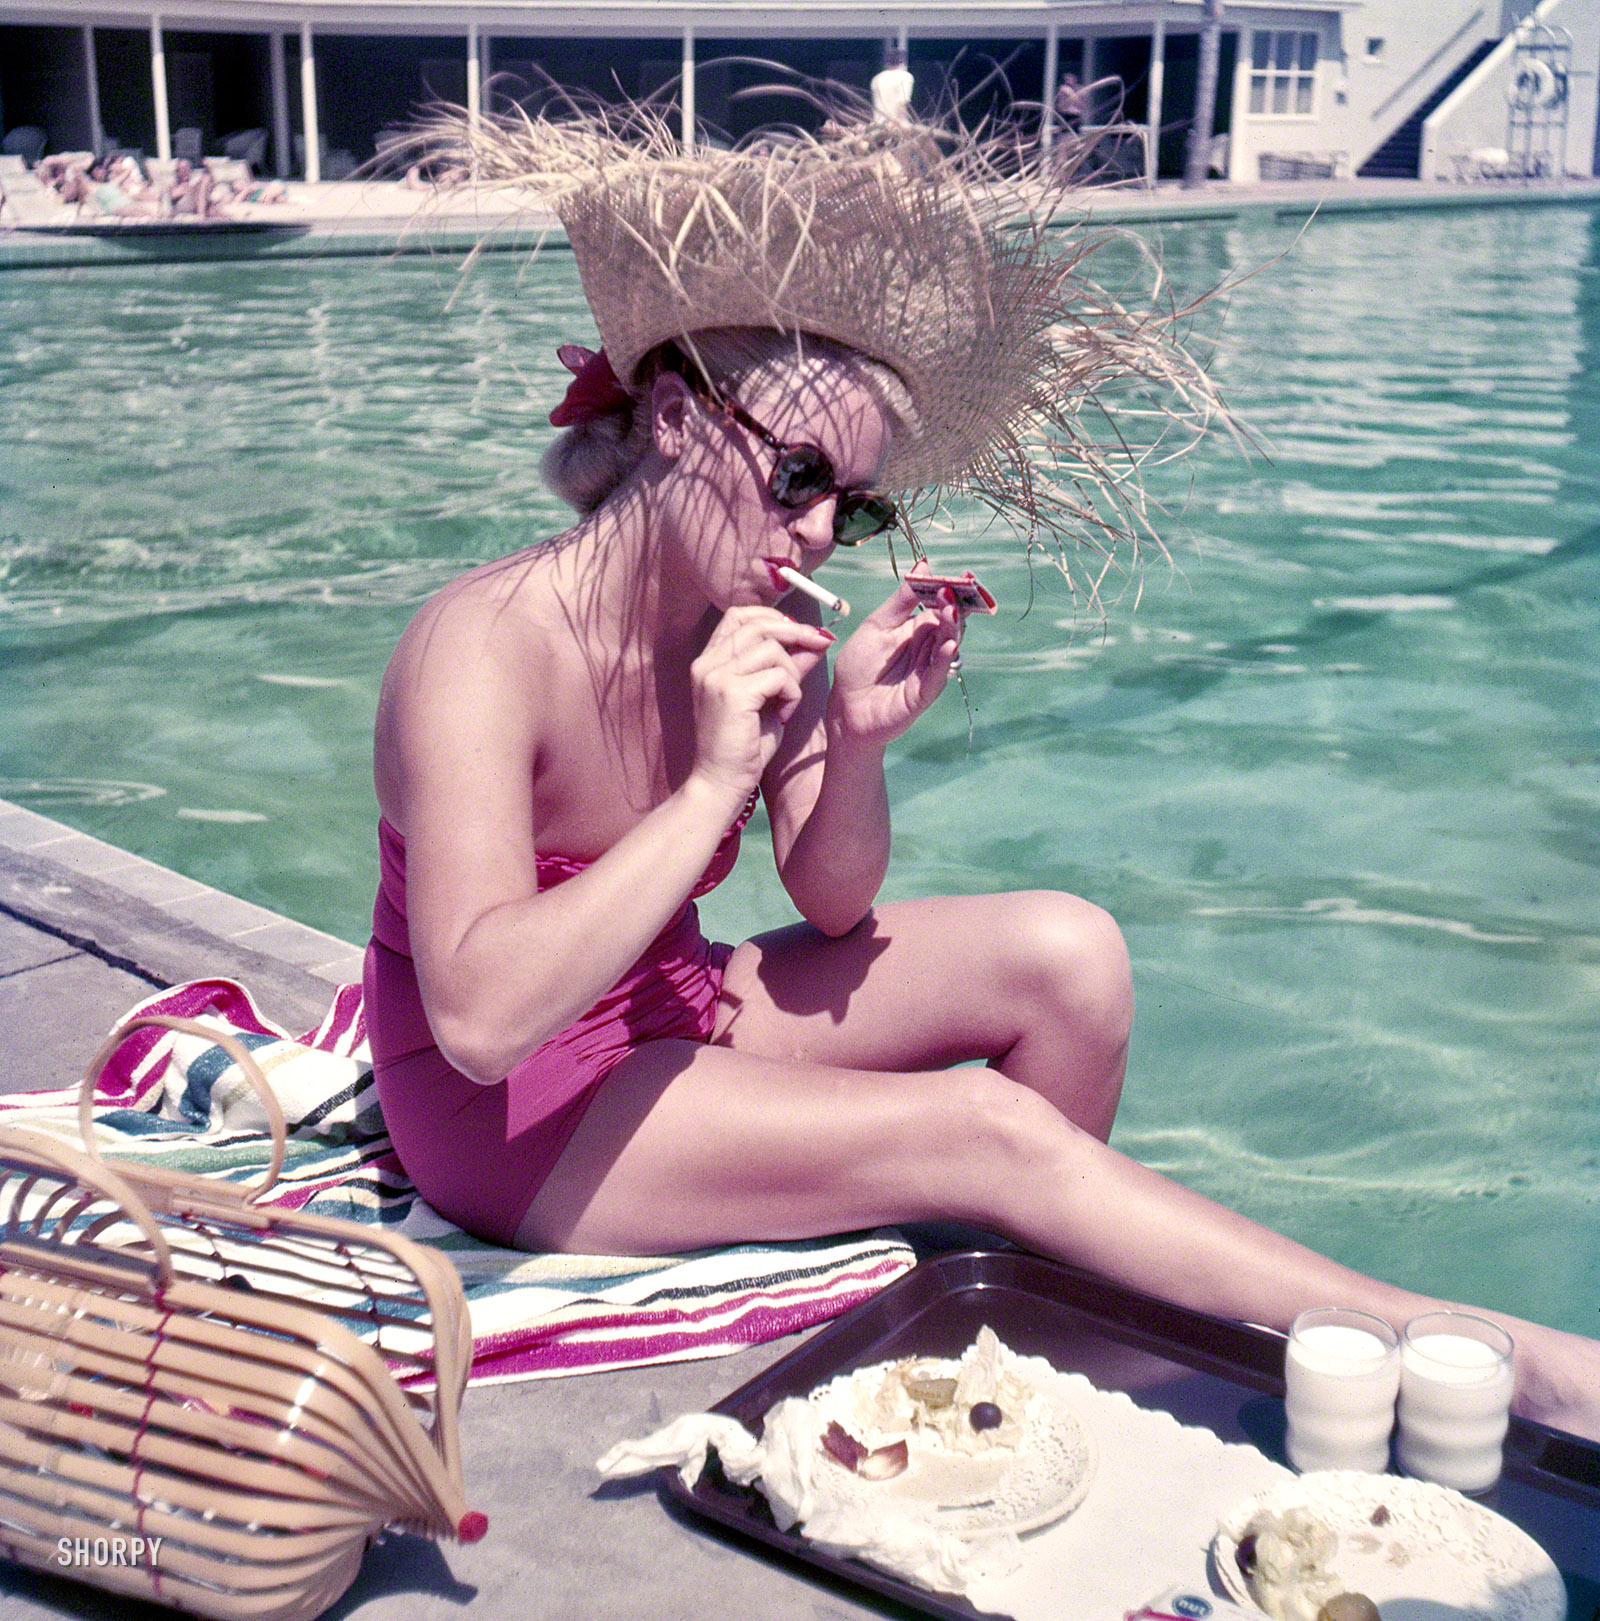 1951. Santa Barbara, California. "Lana Turner lunching by pool at the Coral Casino." Photo by Earl Theisen for Look magazine. View full size.